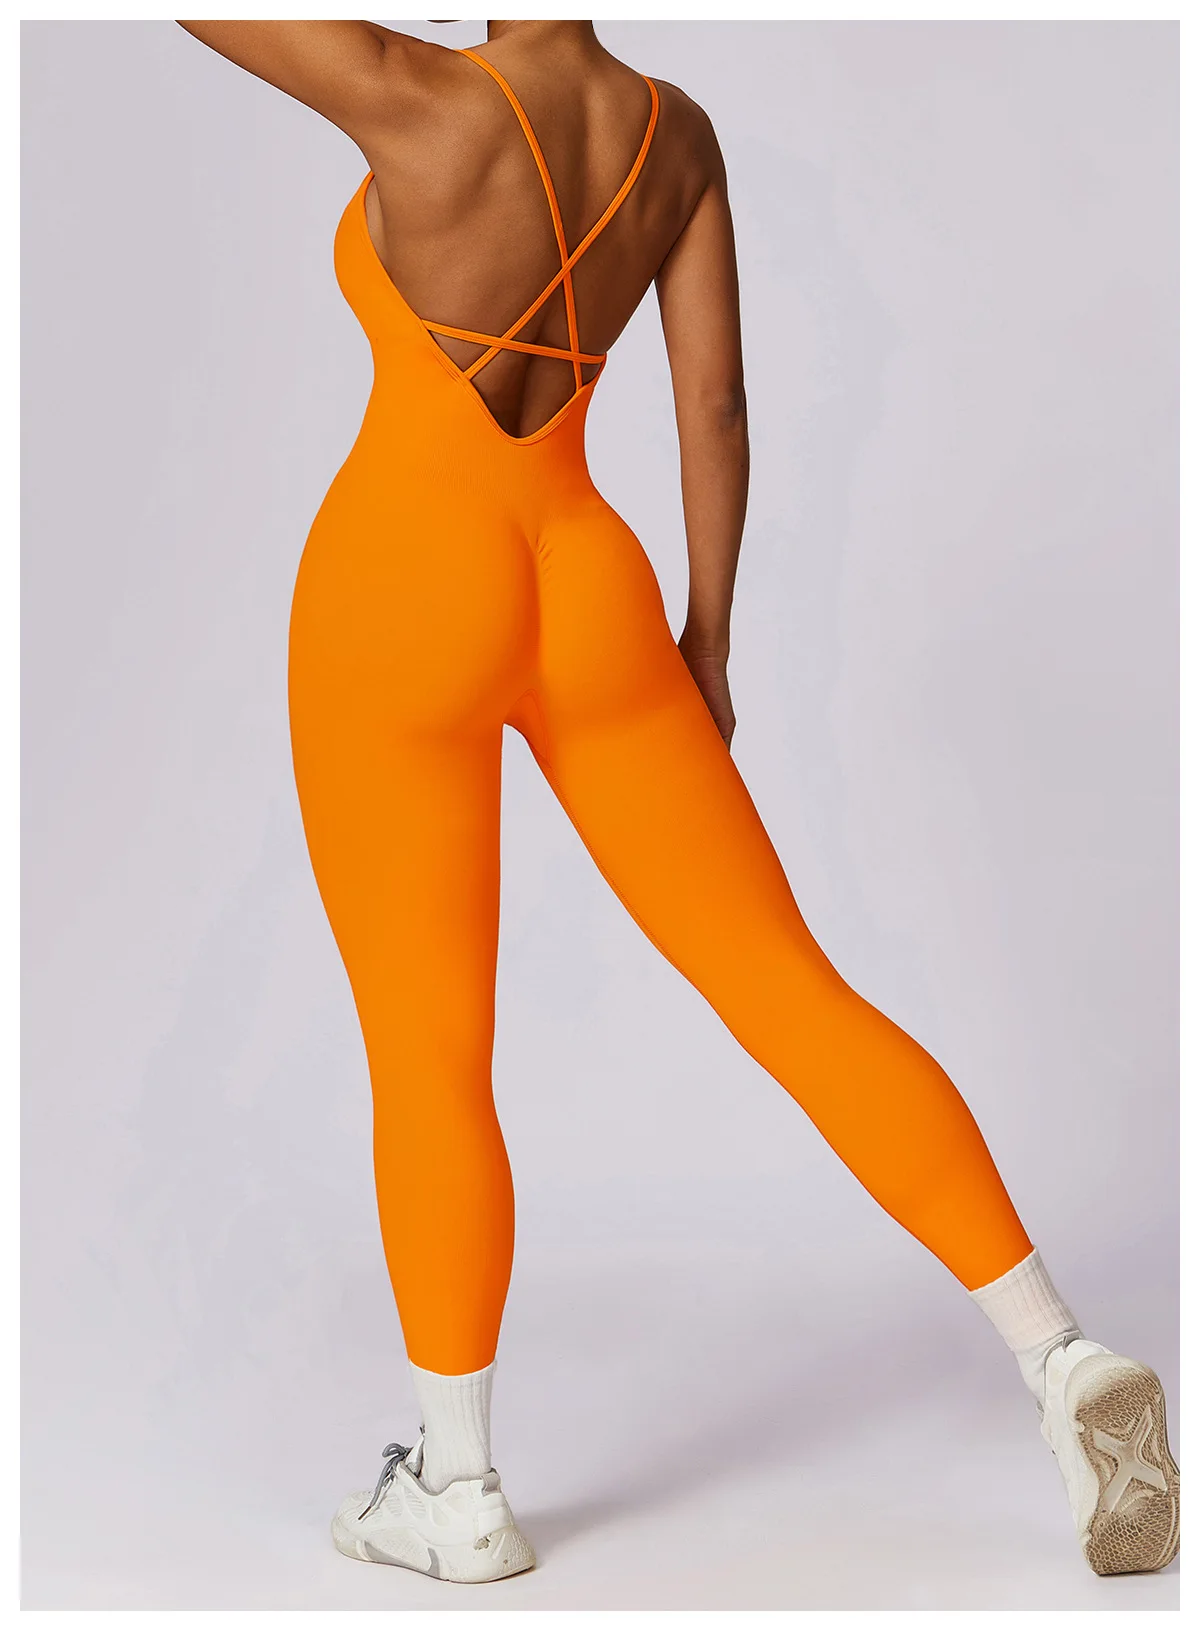 

Womens Workout Strappy Jumpsuits Seamless Padded V Neck Sleeveless Unitard Slim Fit Jumpsuits Yoga Romper Bodycon Bodysuits